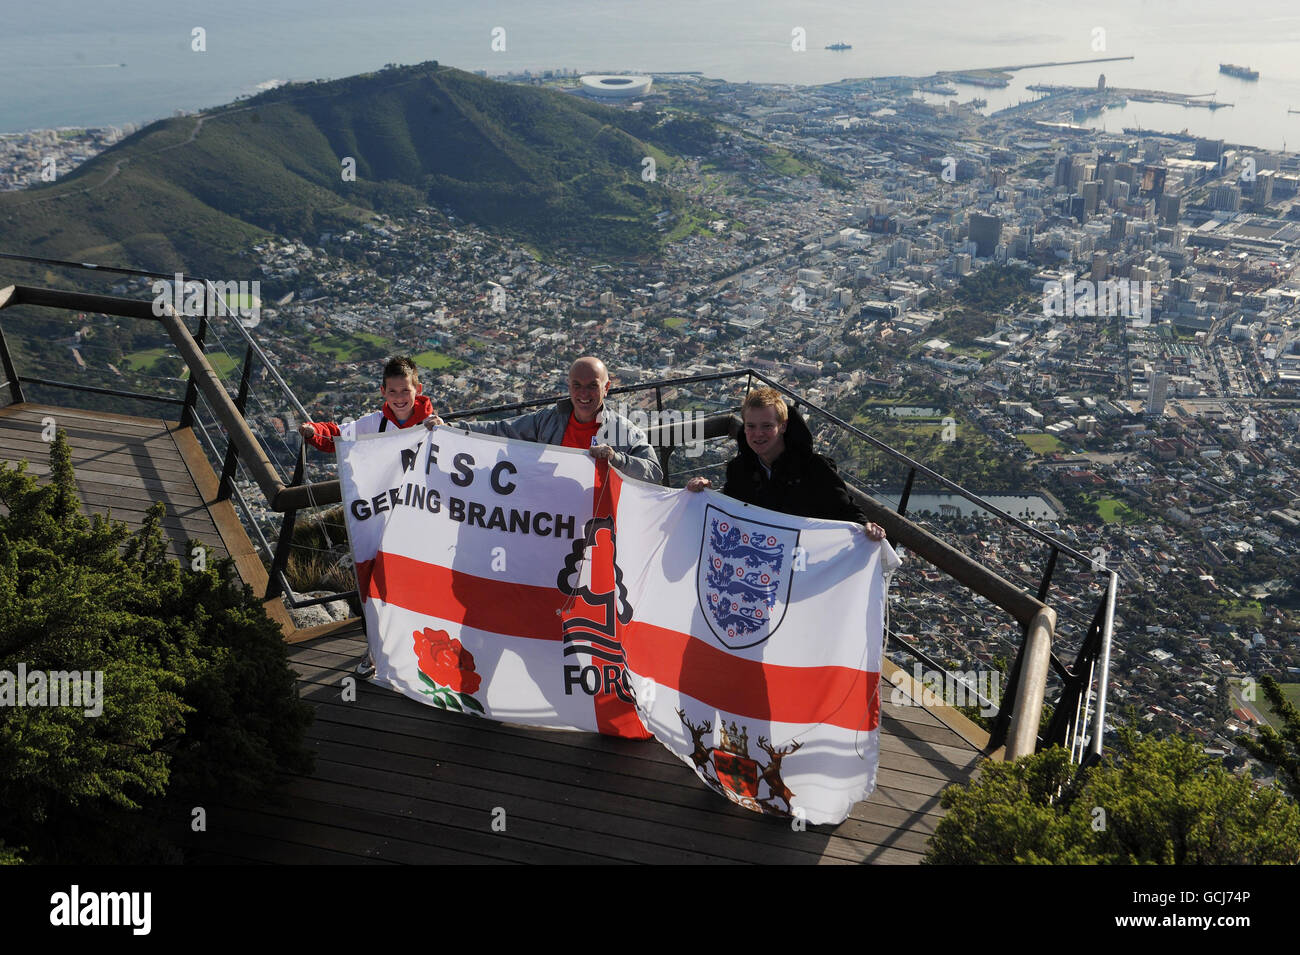 England fans soak up the atmosphere at the top Of Table Mountain in Cape Town, South Africa. Stock Photo